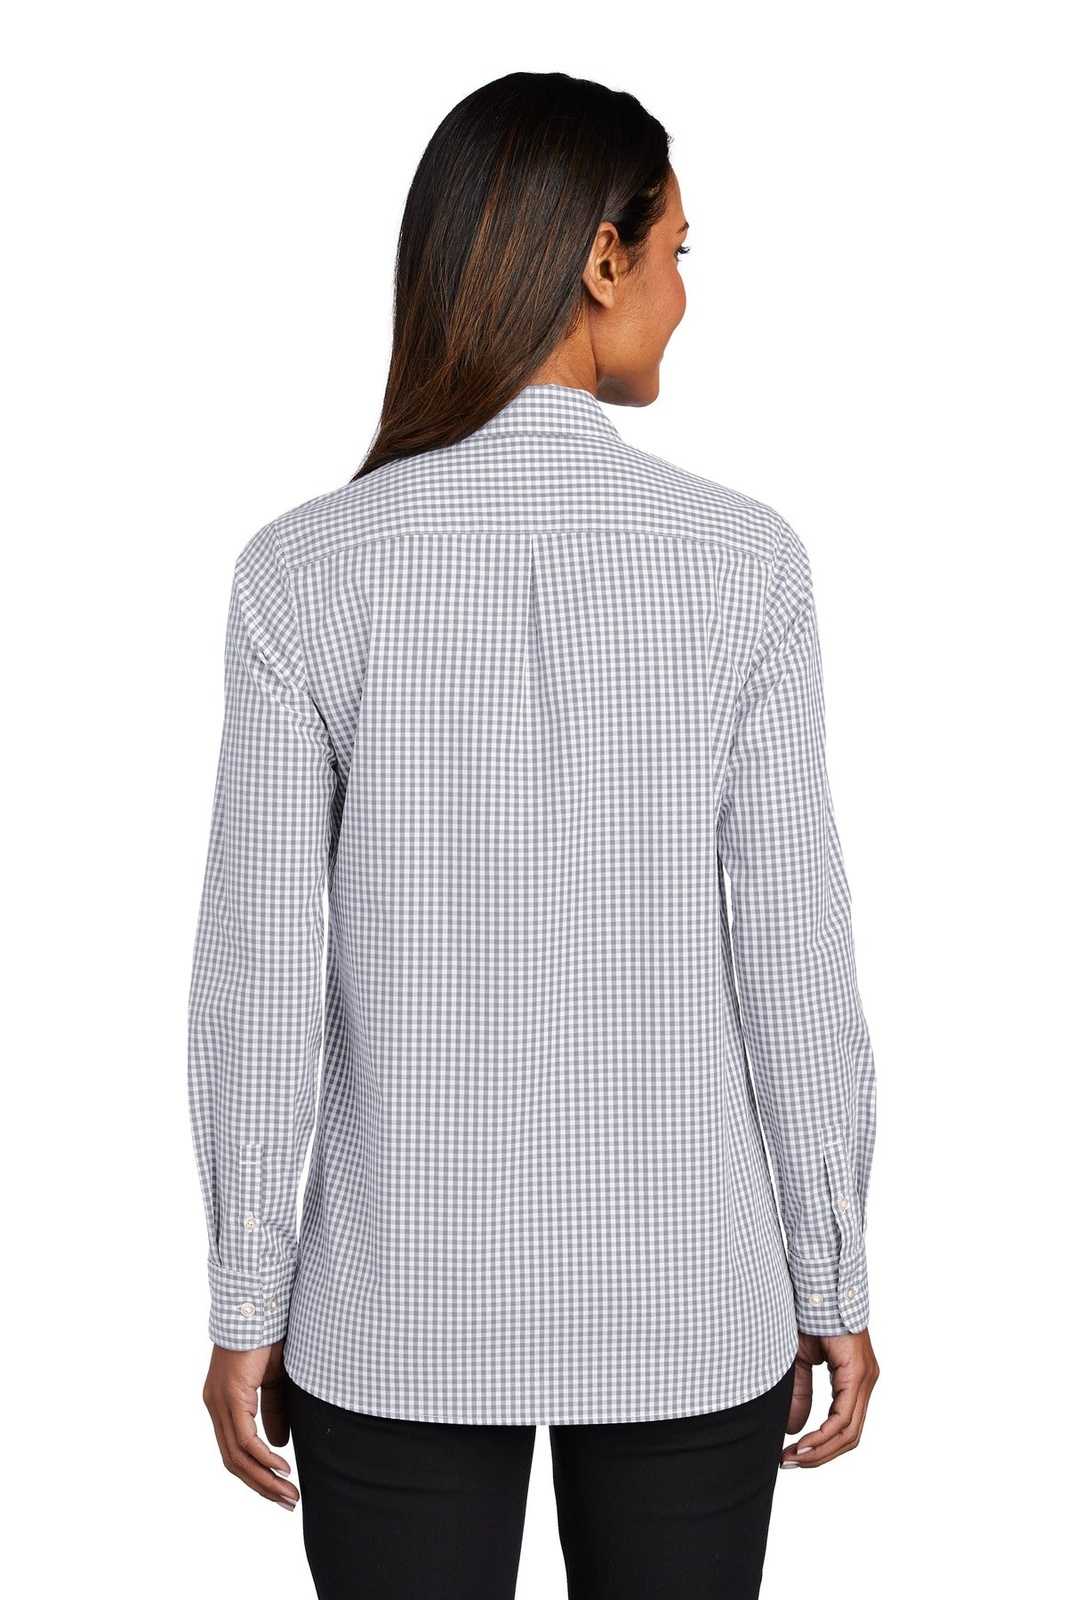 Port Authority LW644 Ladies Broadcloth Gingham Easy Care Shirt - Gusty Gray White - HIT a Double - 2